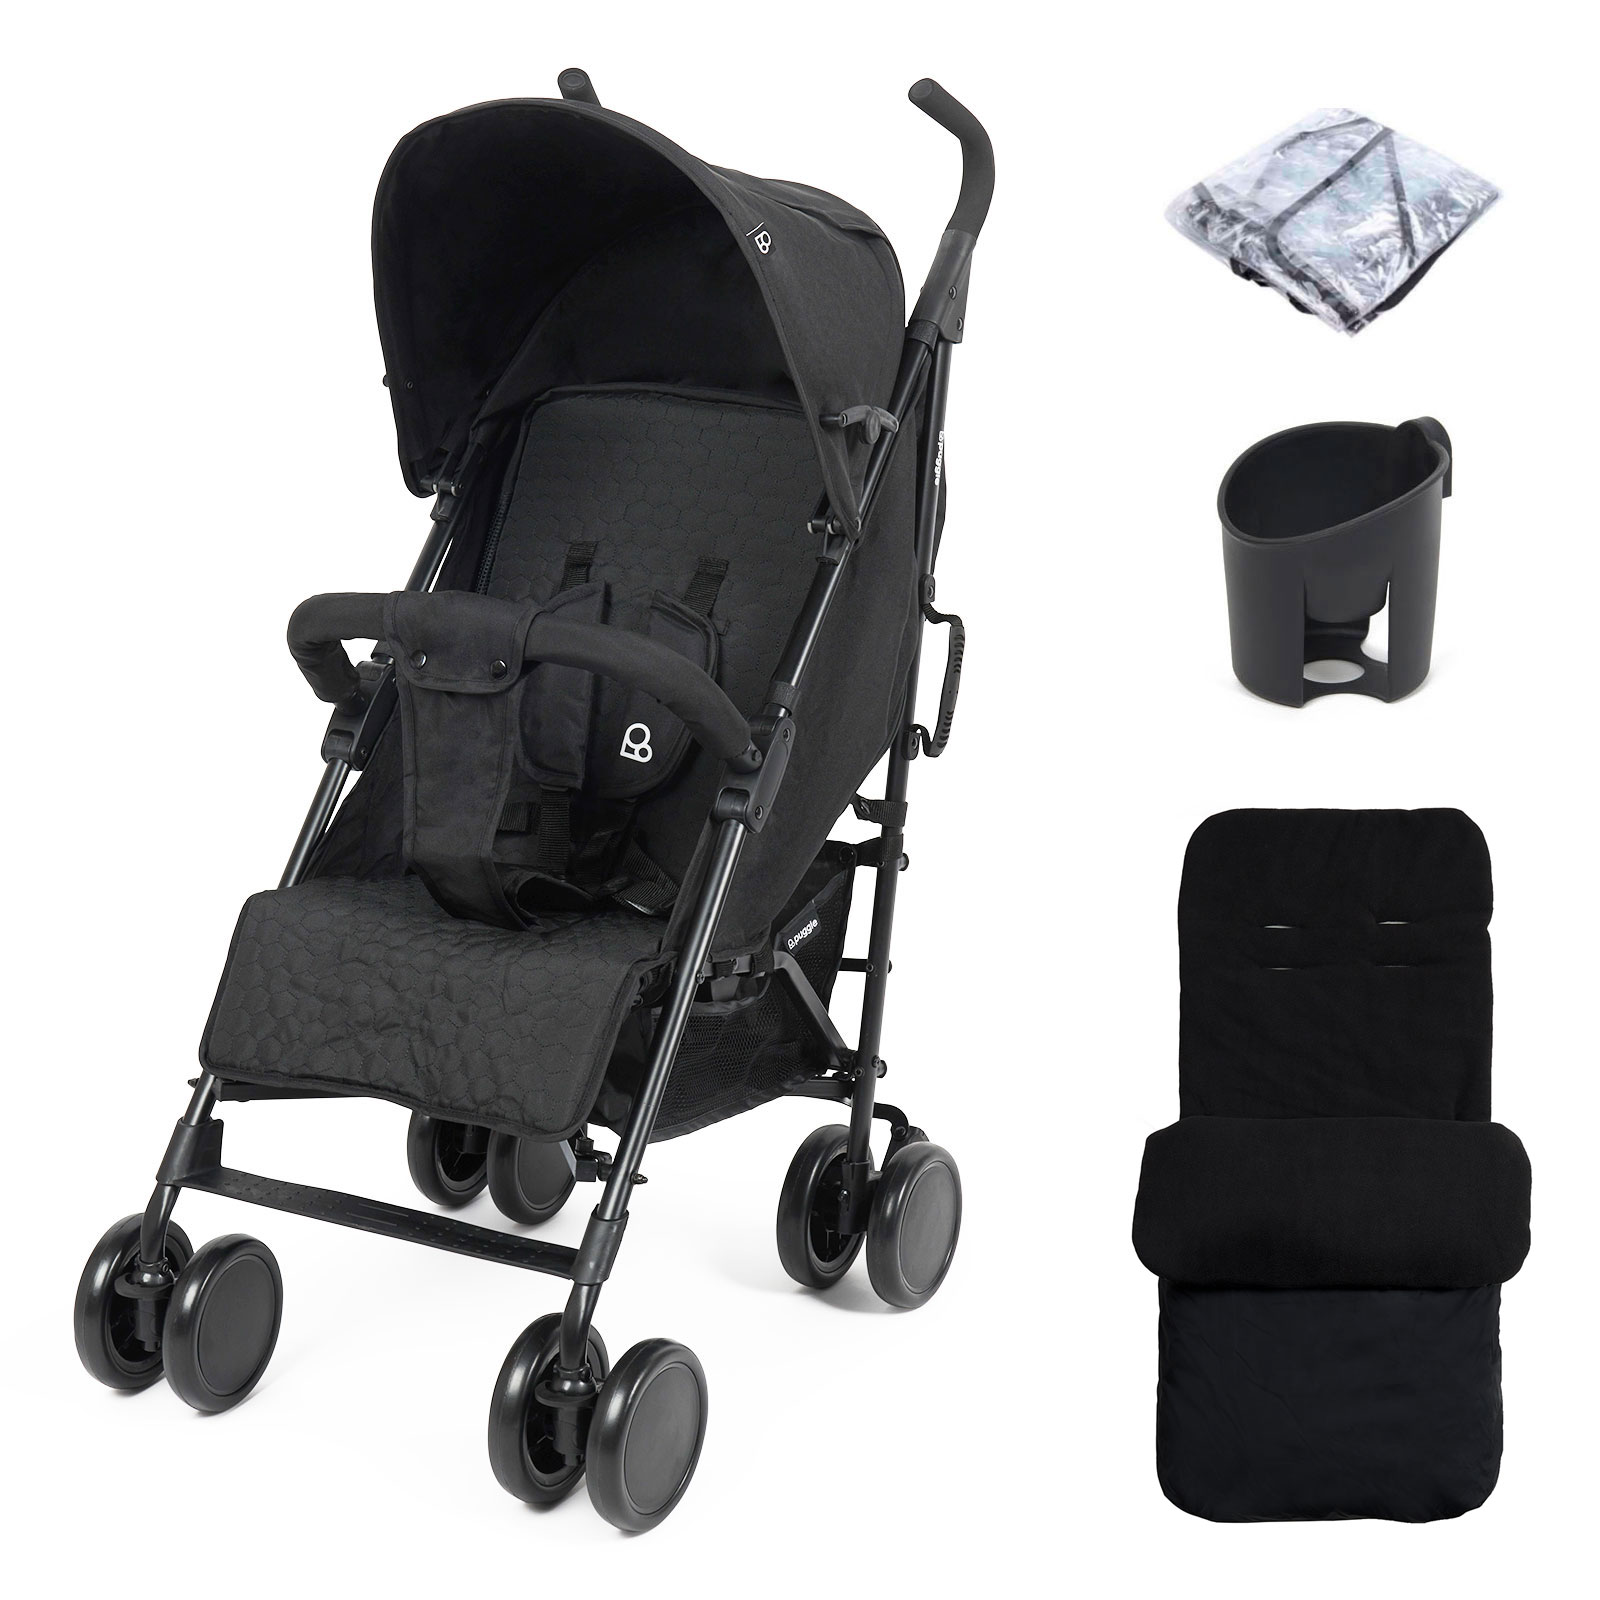 Puggle Litemax Pushchair Stroller with Raincover, Cupholder and Universal Deluxe Footmuff - Storm Black